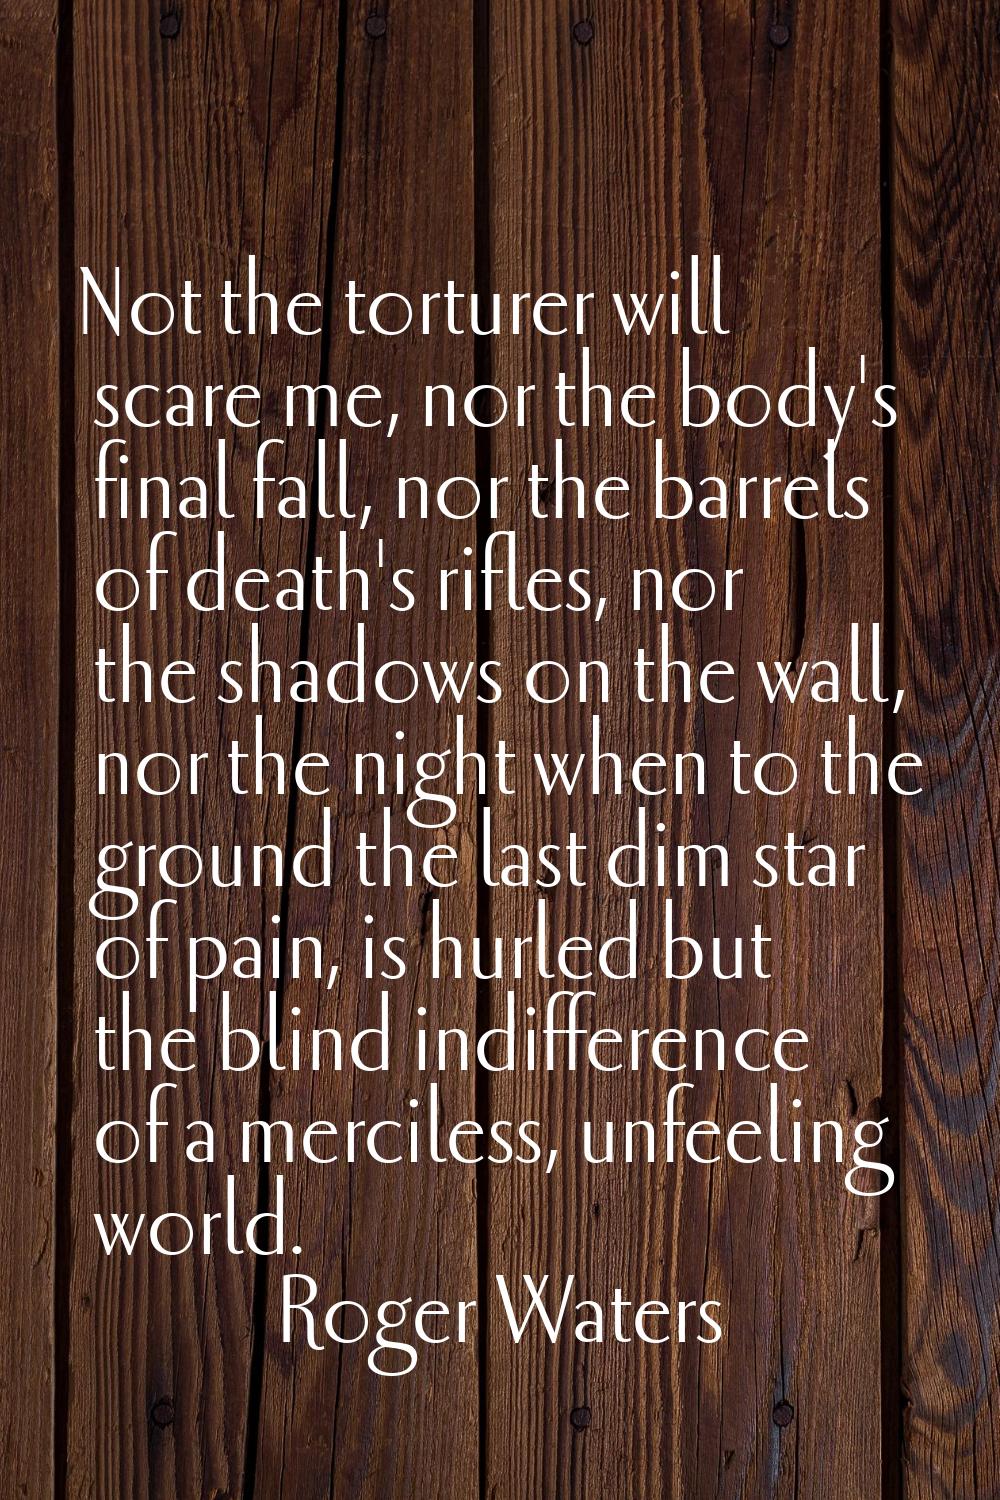 Not the torturer will scare me, nor the body's final fall, nor the barrels of death's rifles, nor t